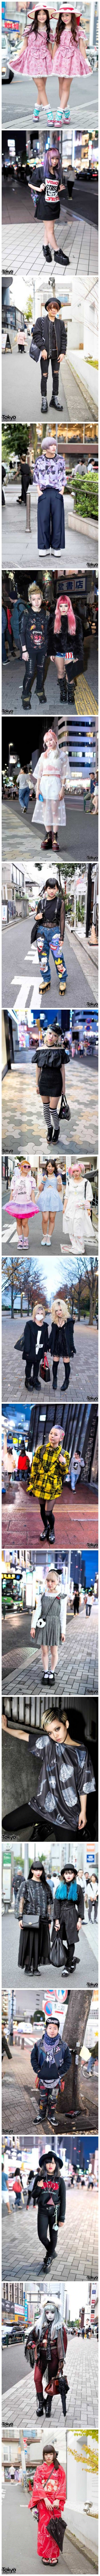 weird japanese fashion funny picture